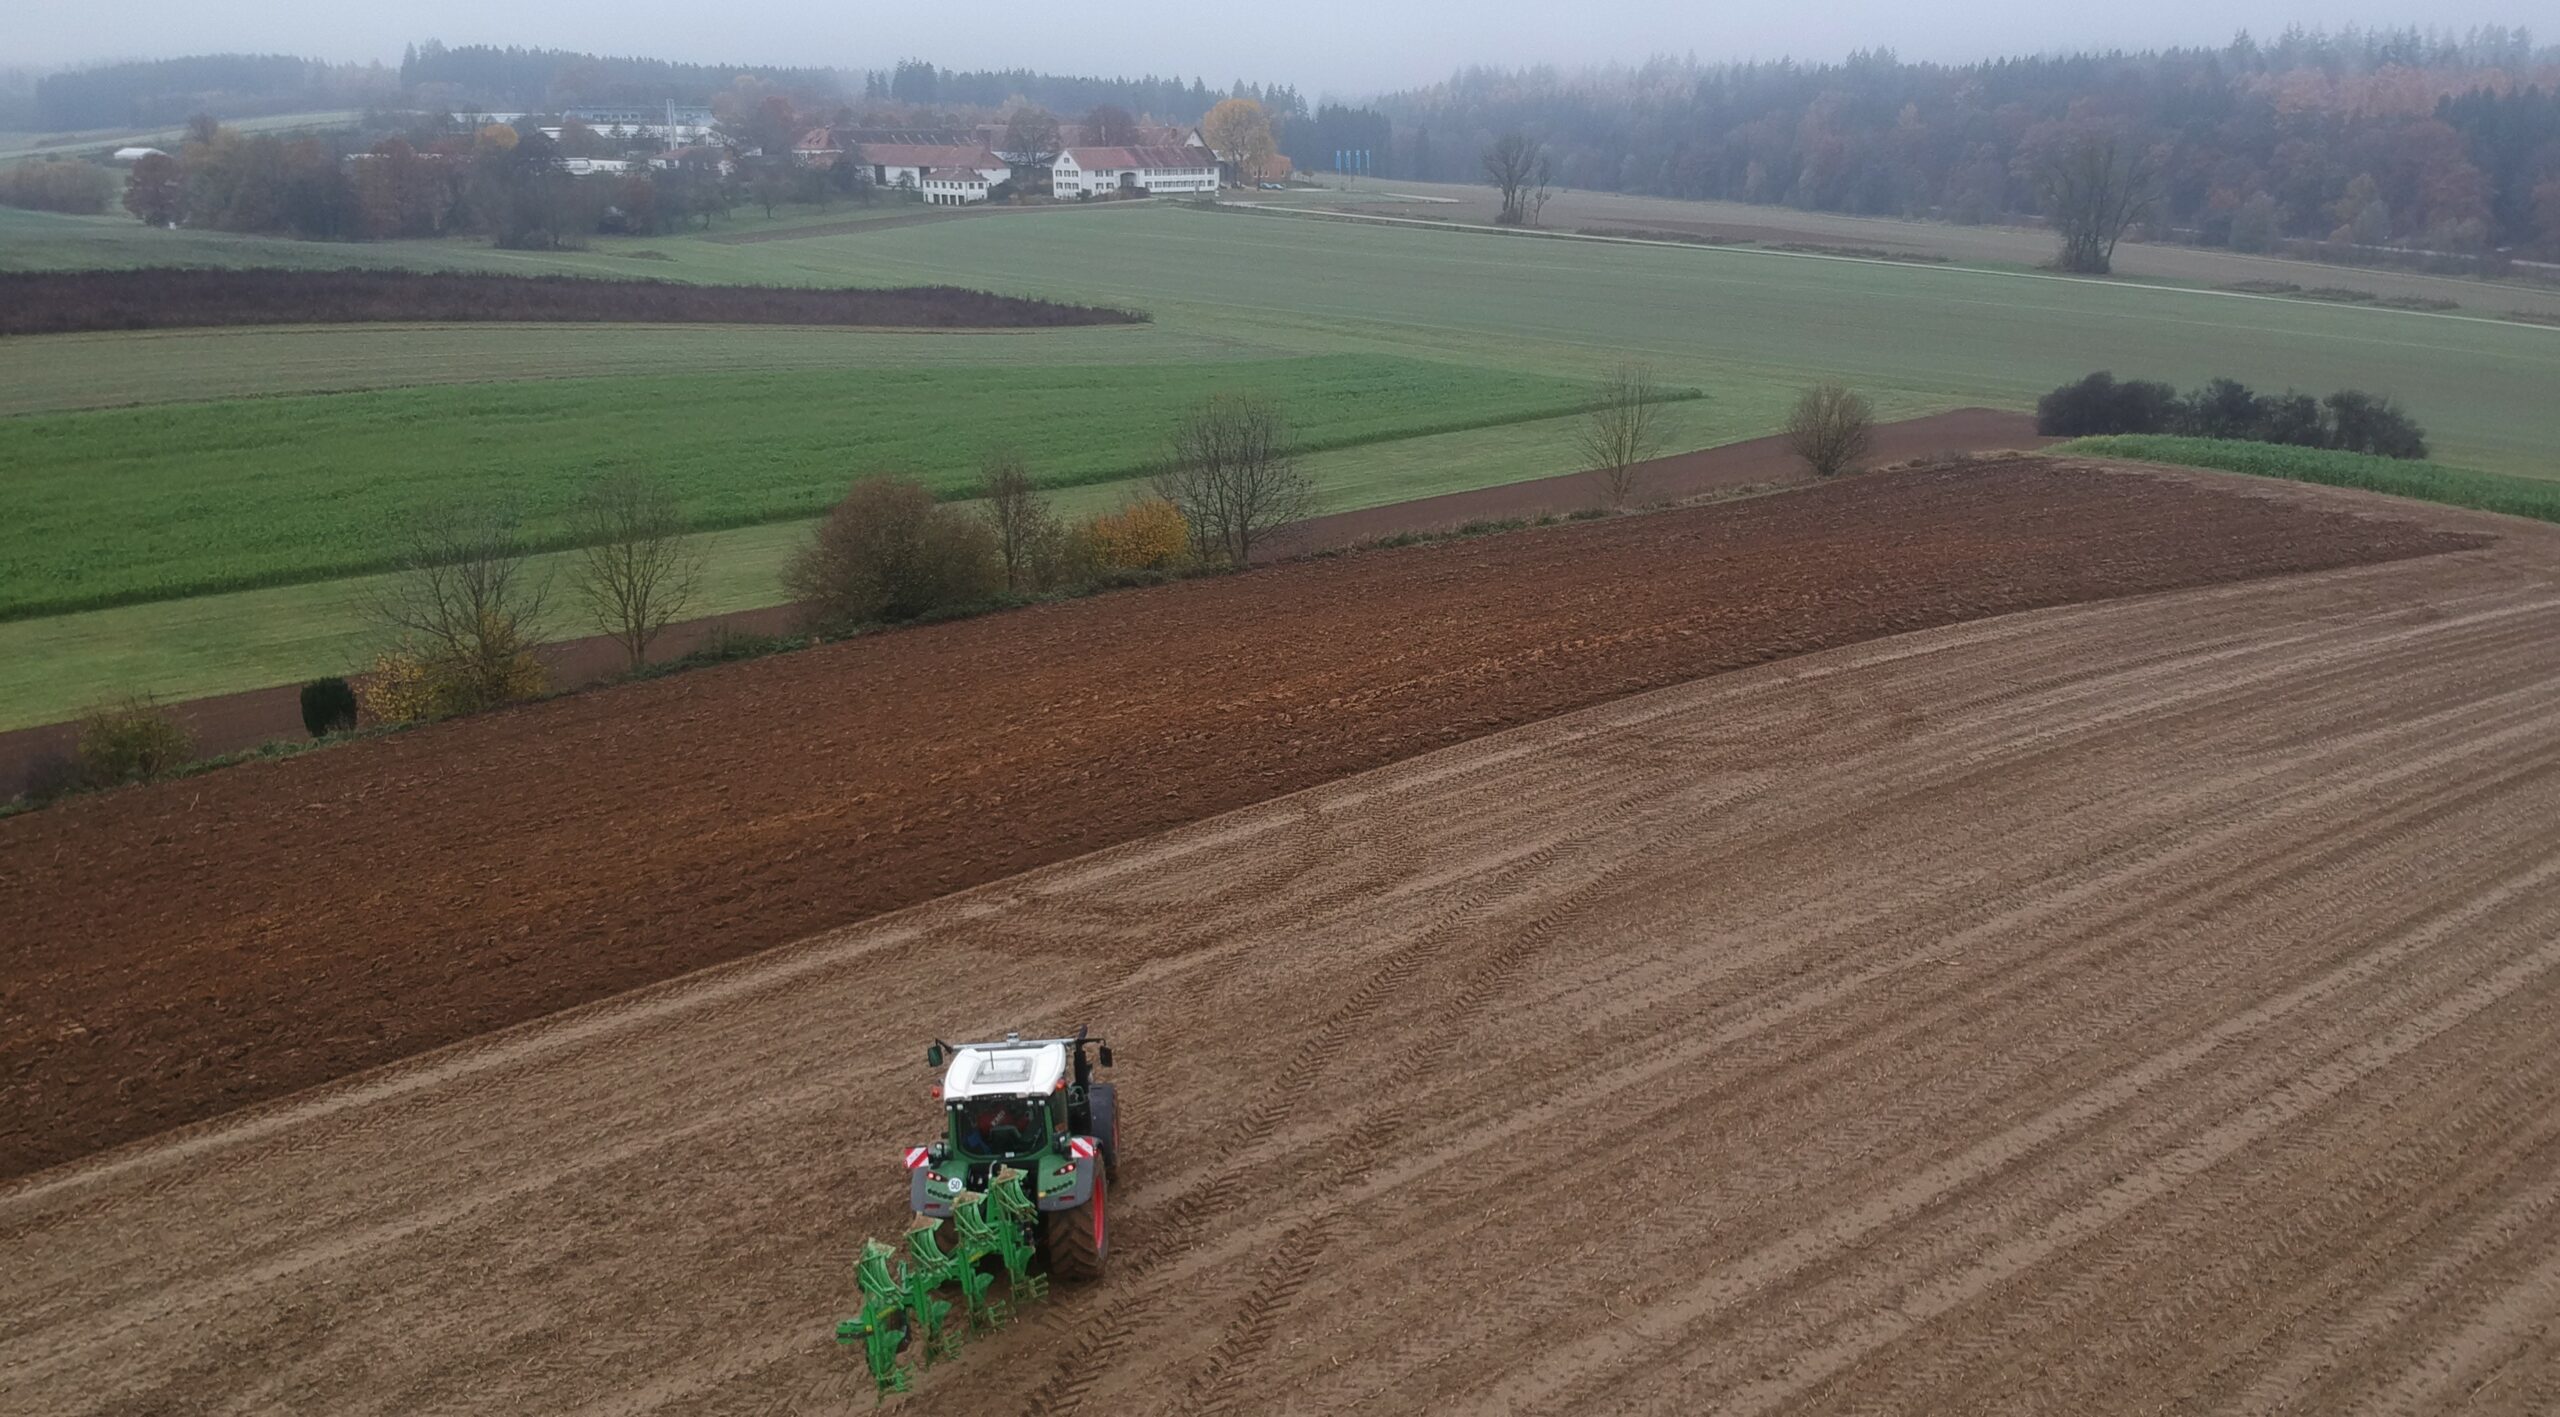 Smart Farming with Automation – An Interwiev with Prof. Oksanen